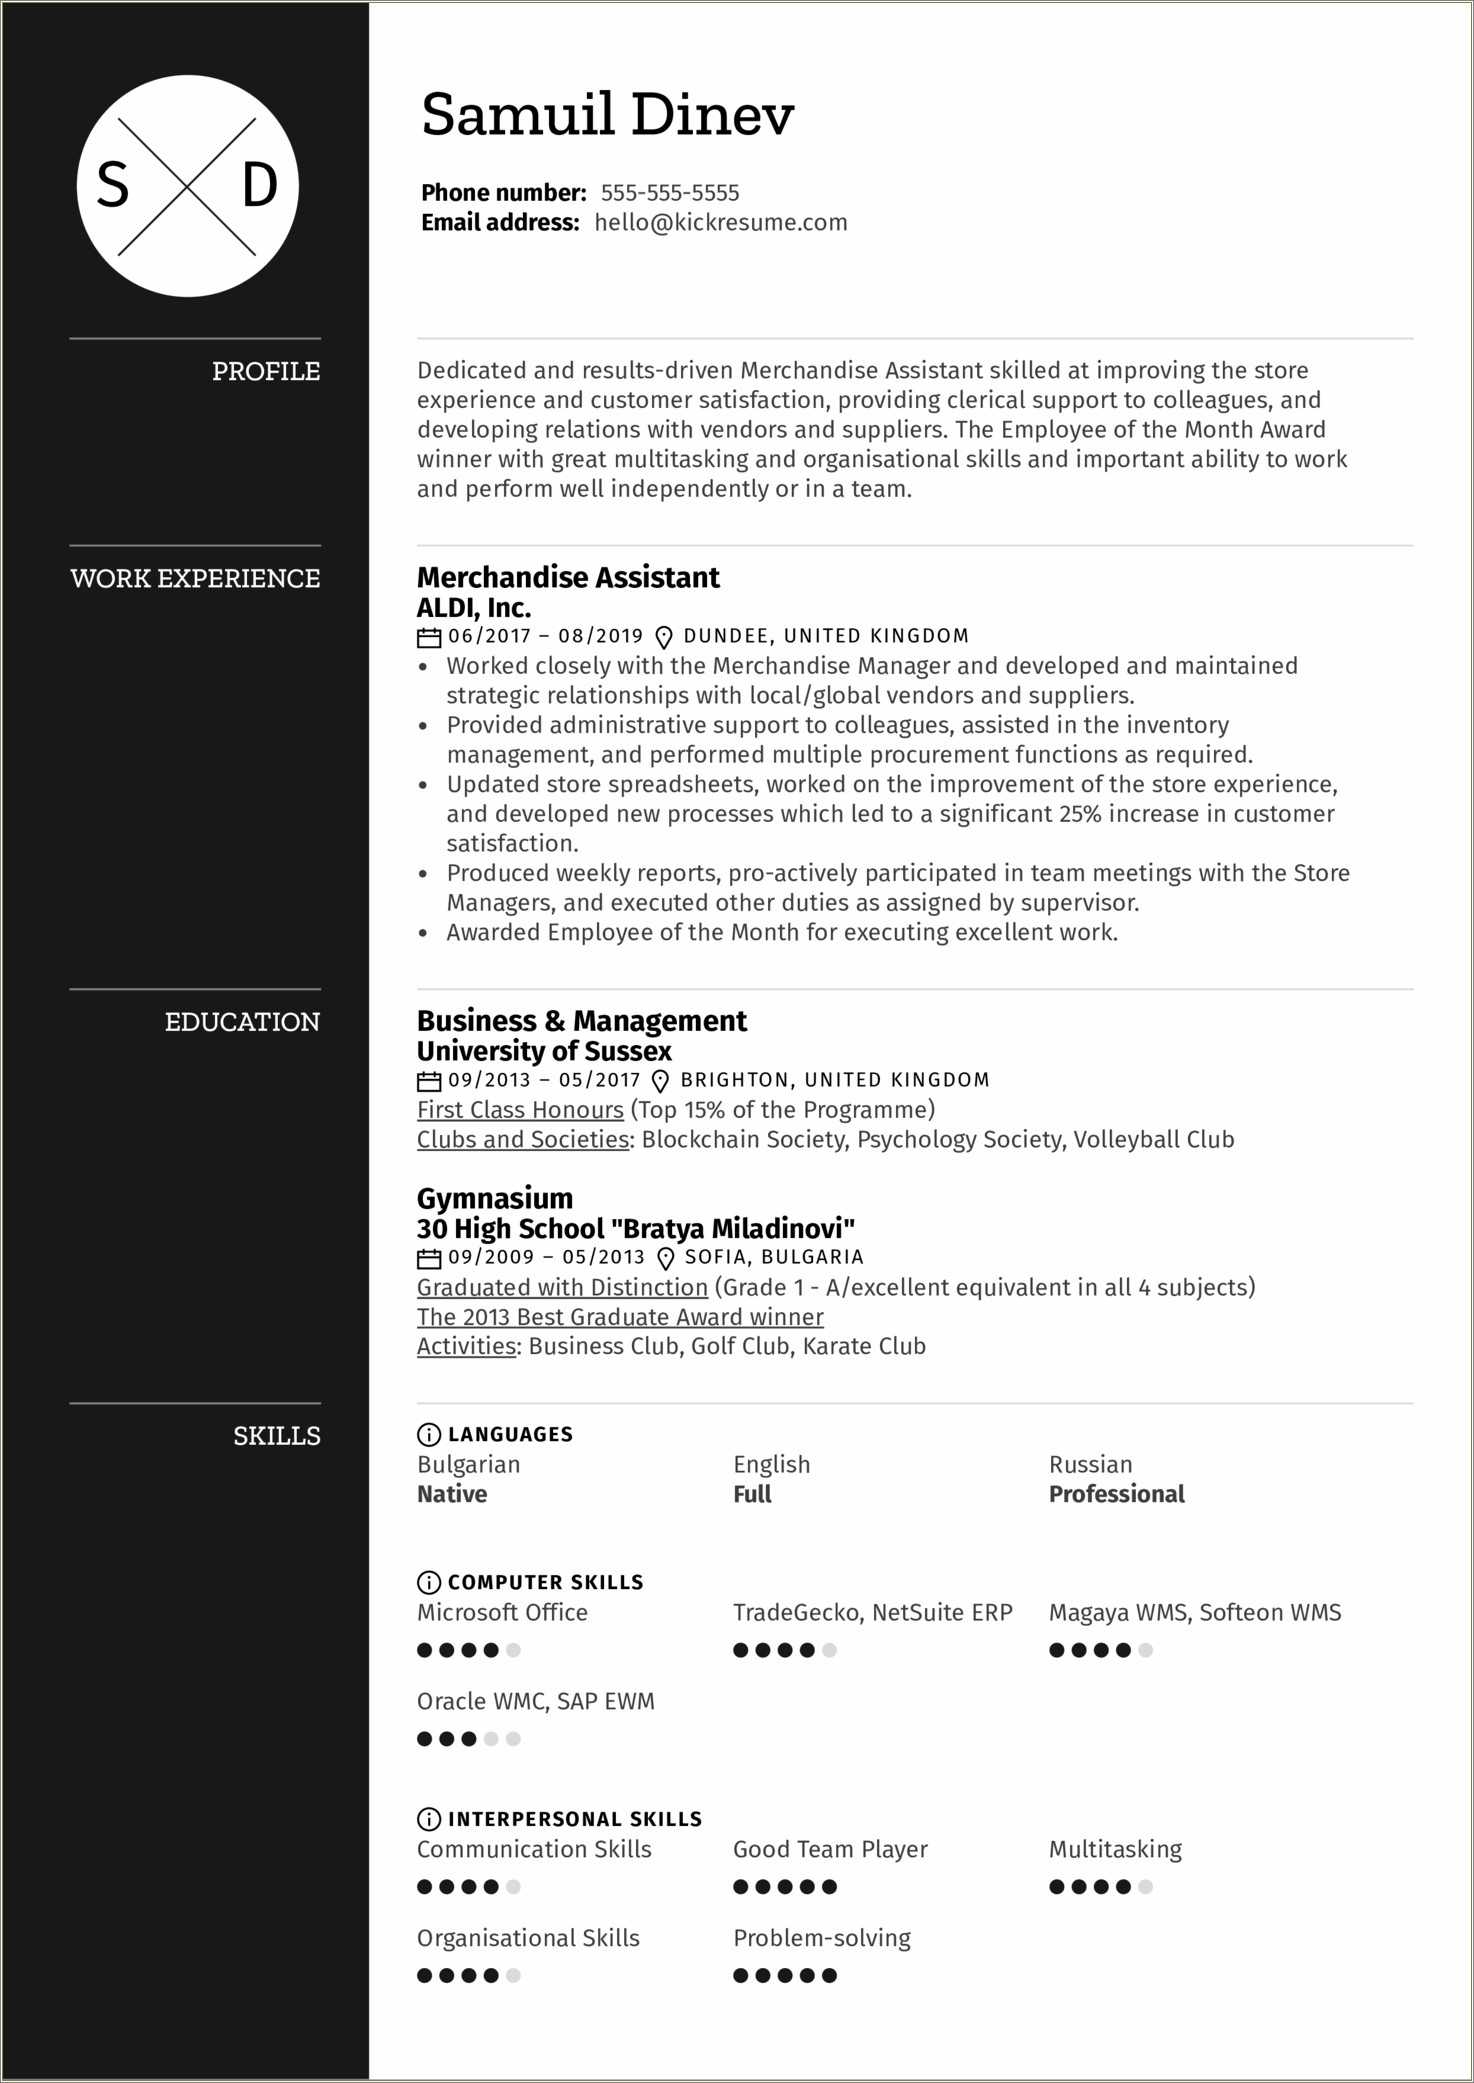 Fashion Merchandising Resume Objective Examples - Resume Example Gallery